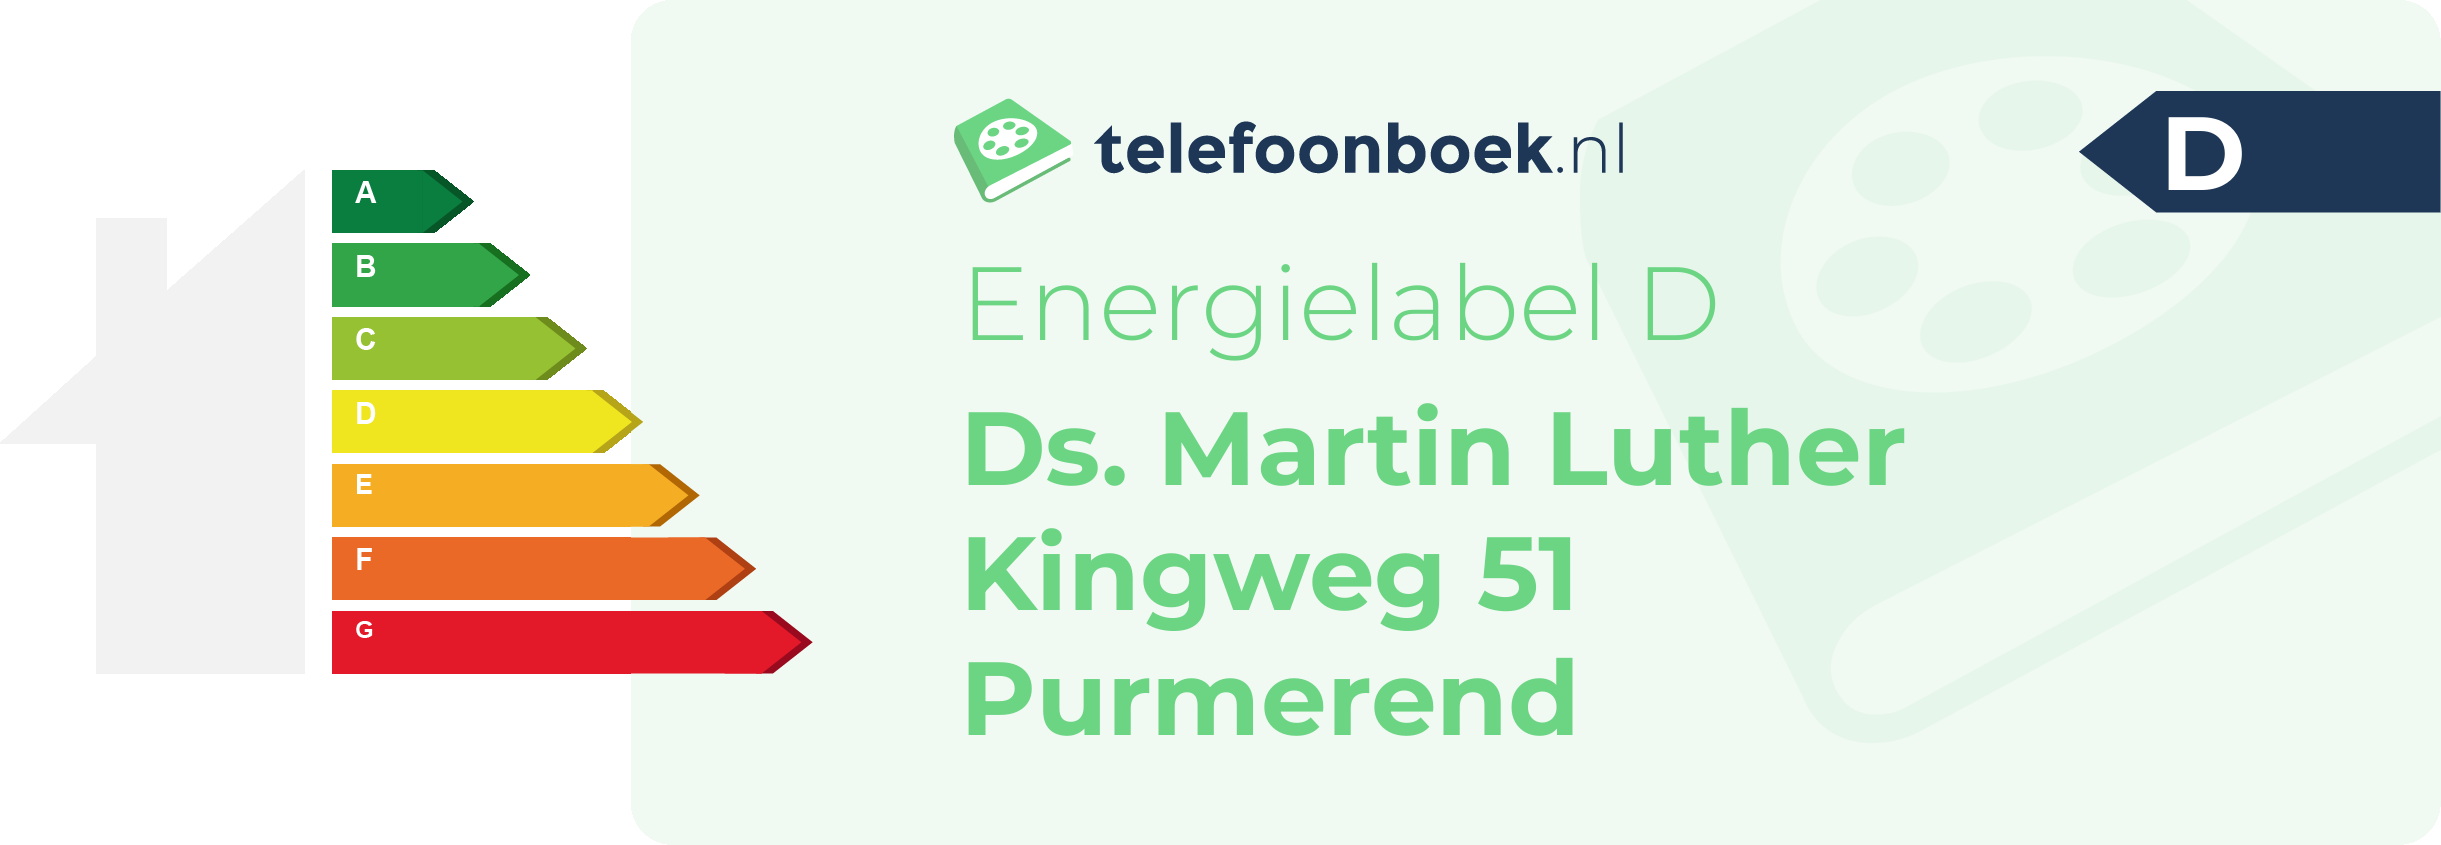 Energielabel Ds. Martin Luther Kingweg 51 Purmerend